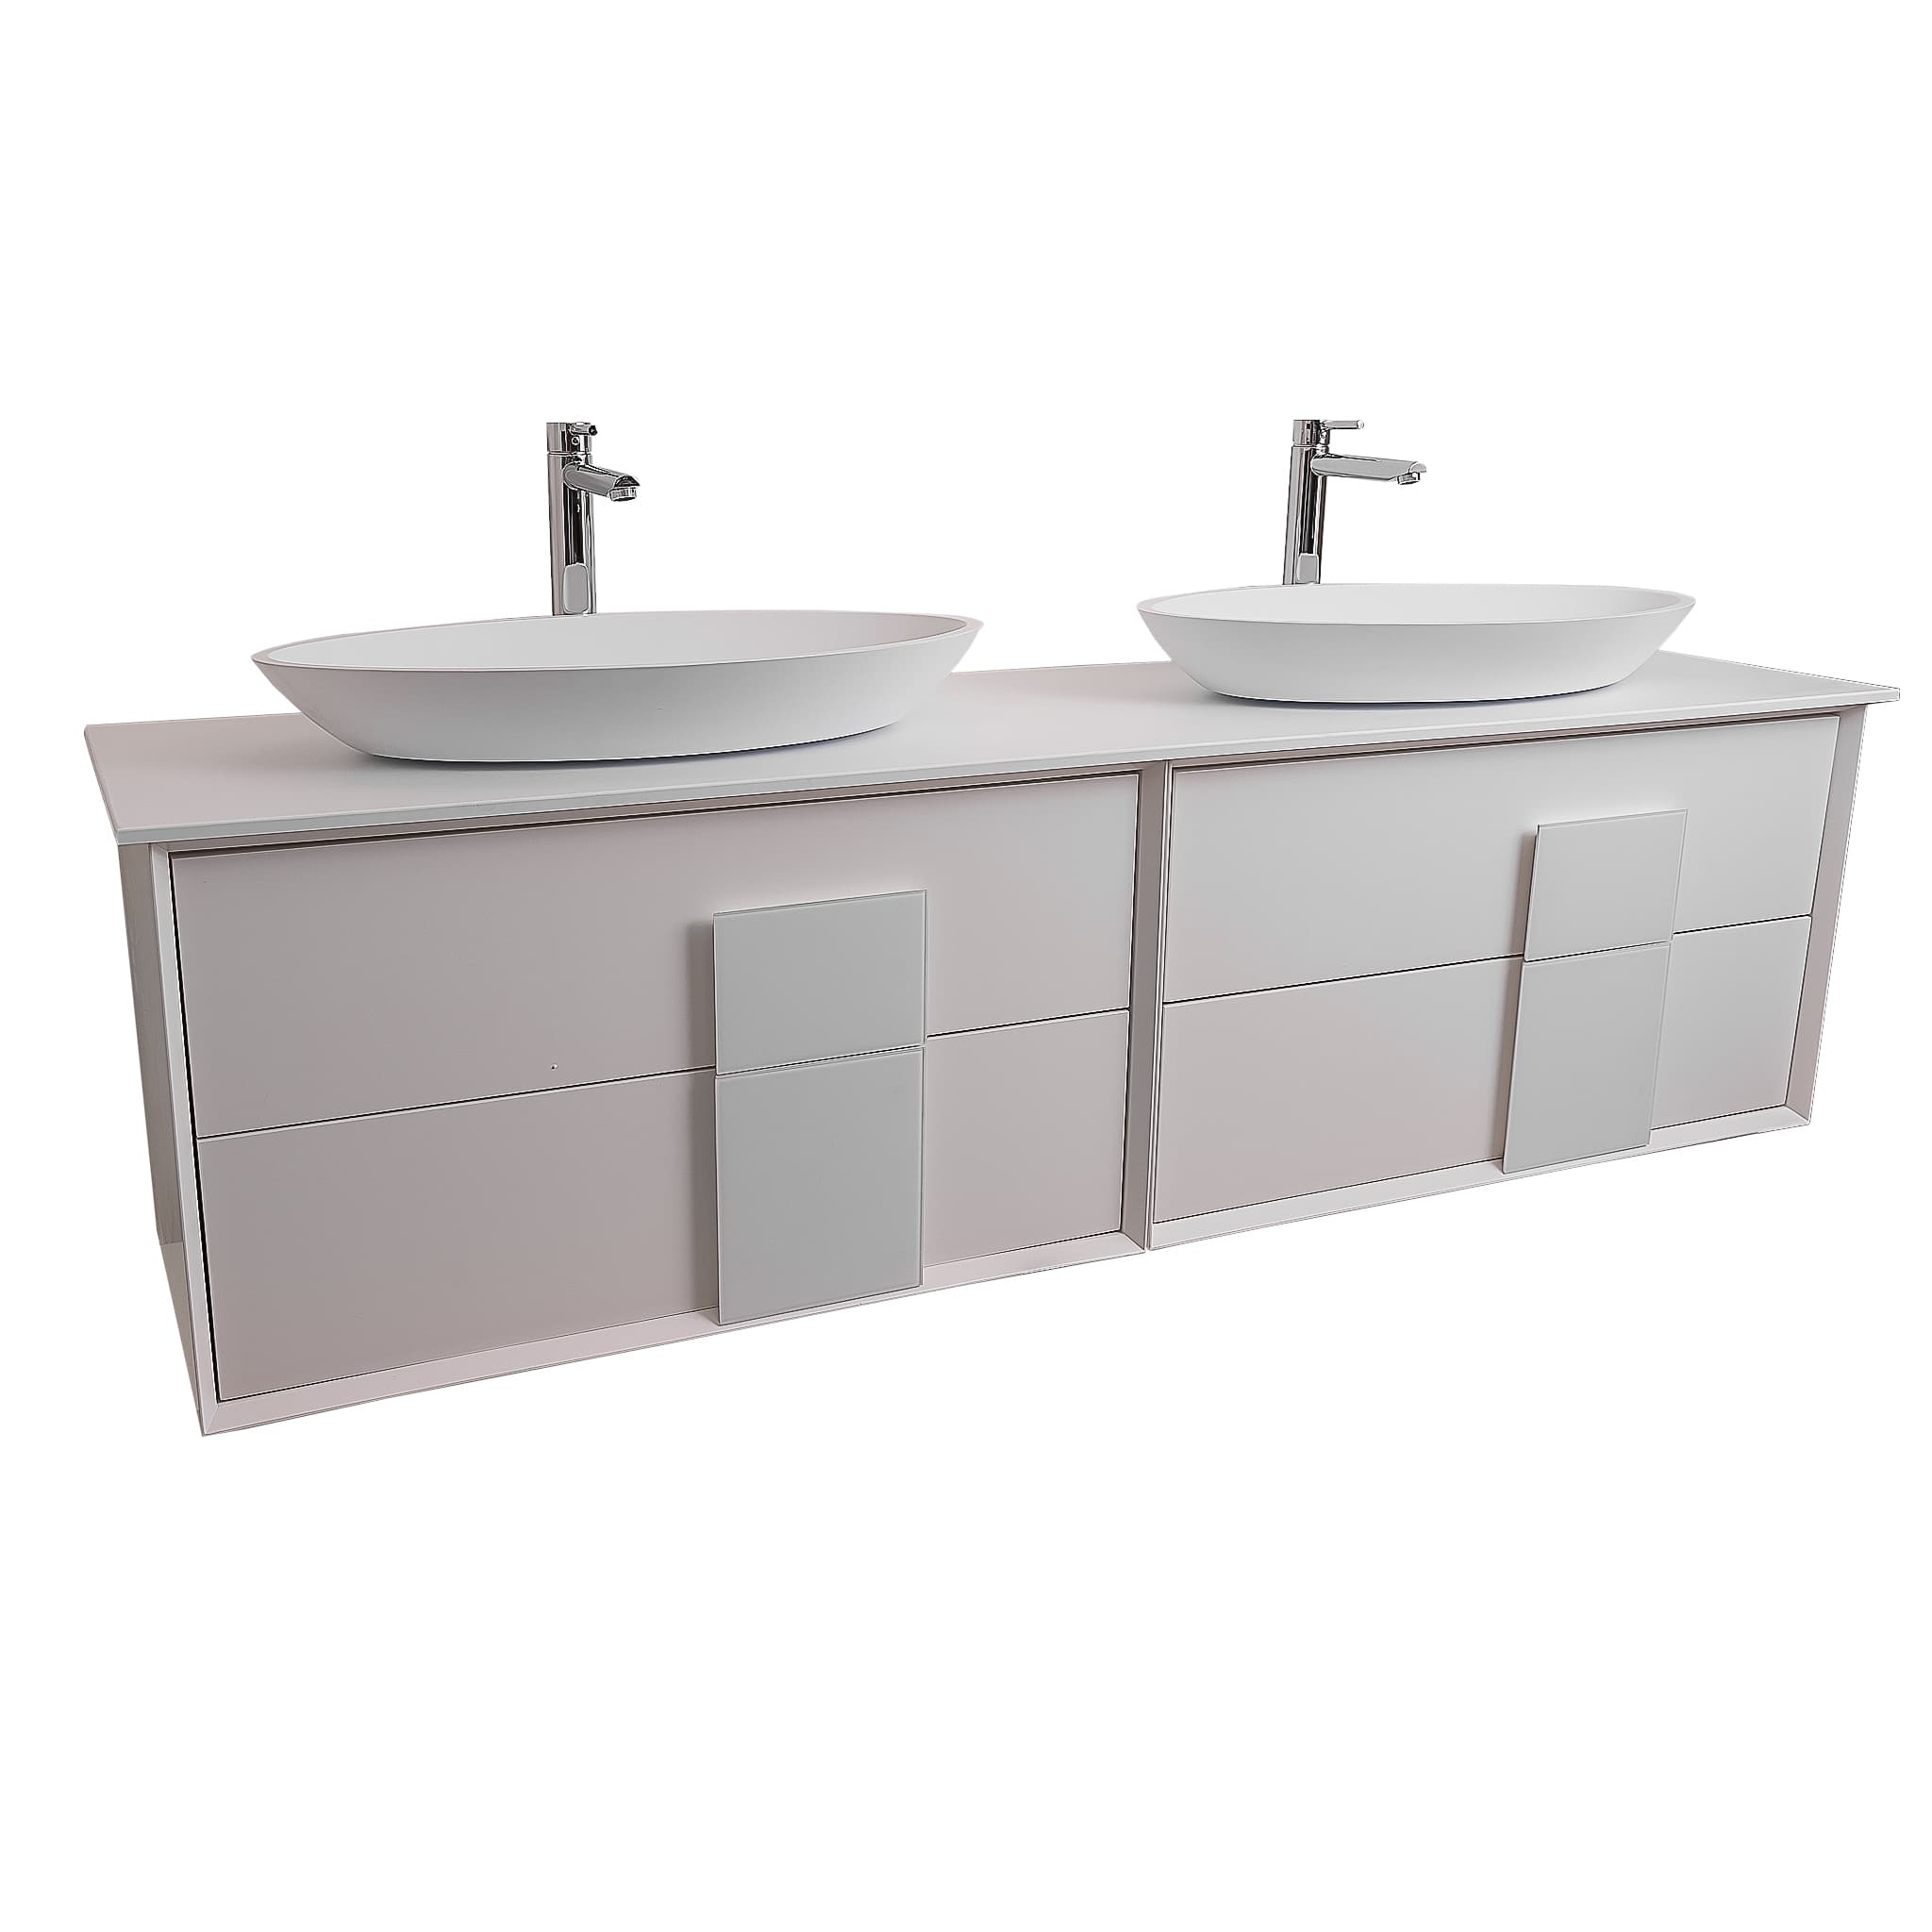 Piazza 63 Matte White With White Handle Cabinet, Solid Surface Flat White Counter and Two Oval Solid Surface White Basin 1305, Wall Mounted Modern Vanity Set